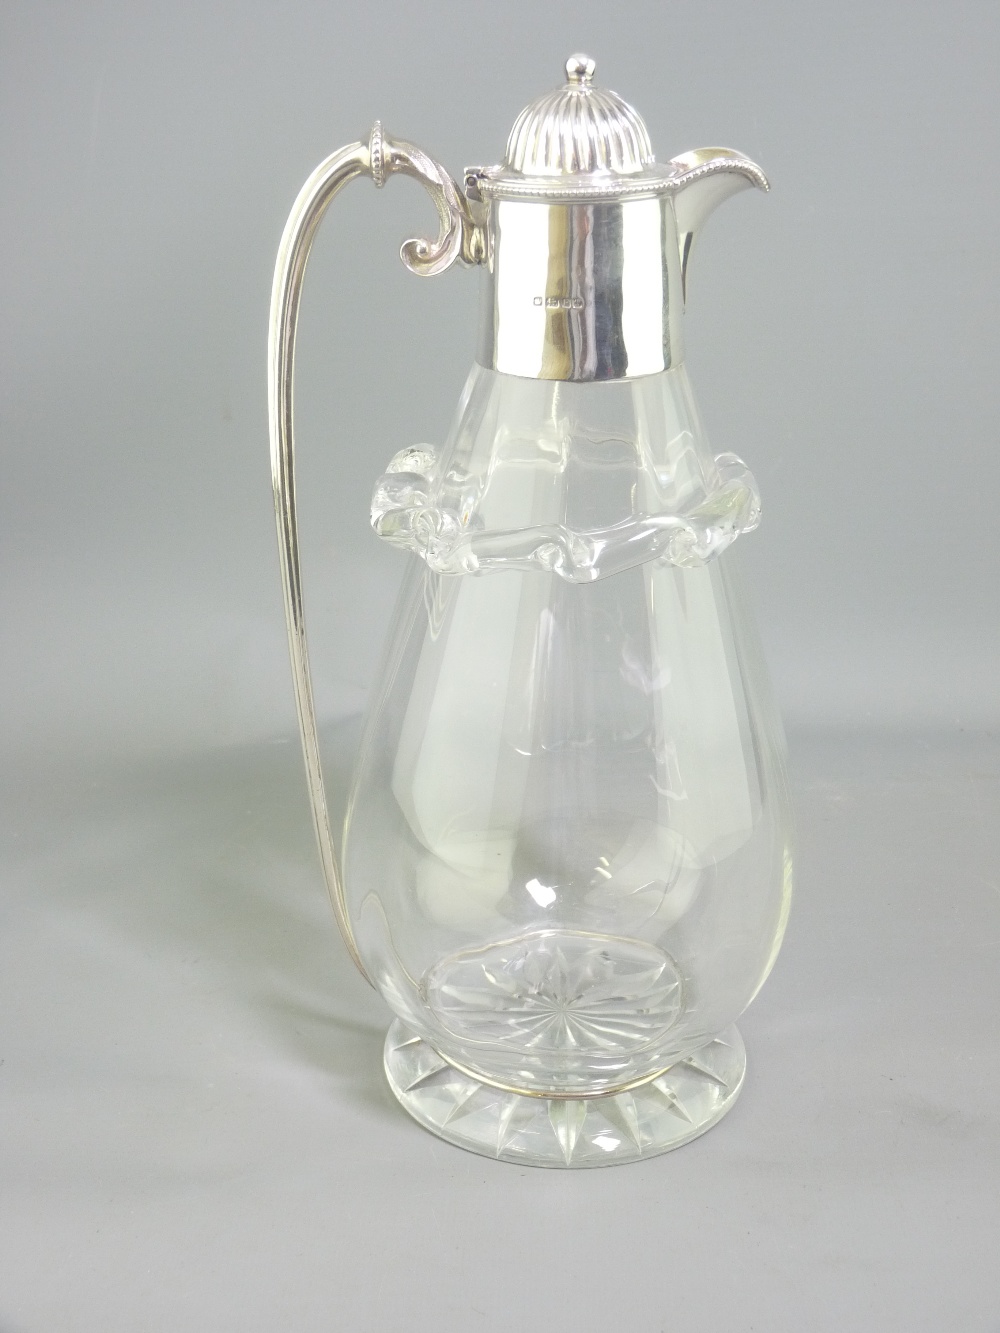 VICTORIAN SILVER TOPPED CLARET JUG, Sheffield 1882, maker probably Charles Favell, dome topped lid